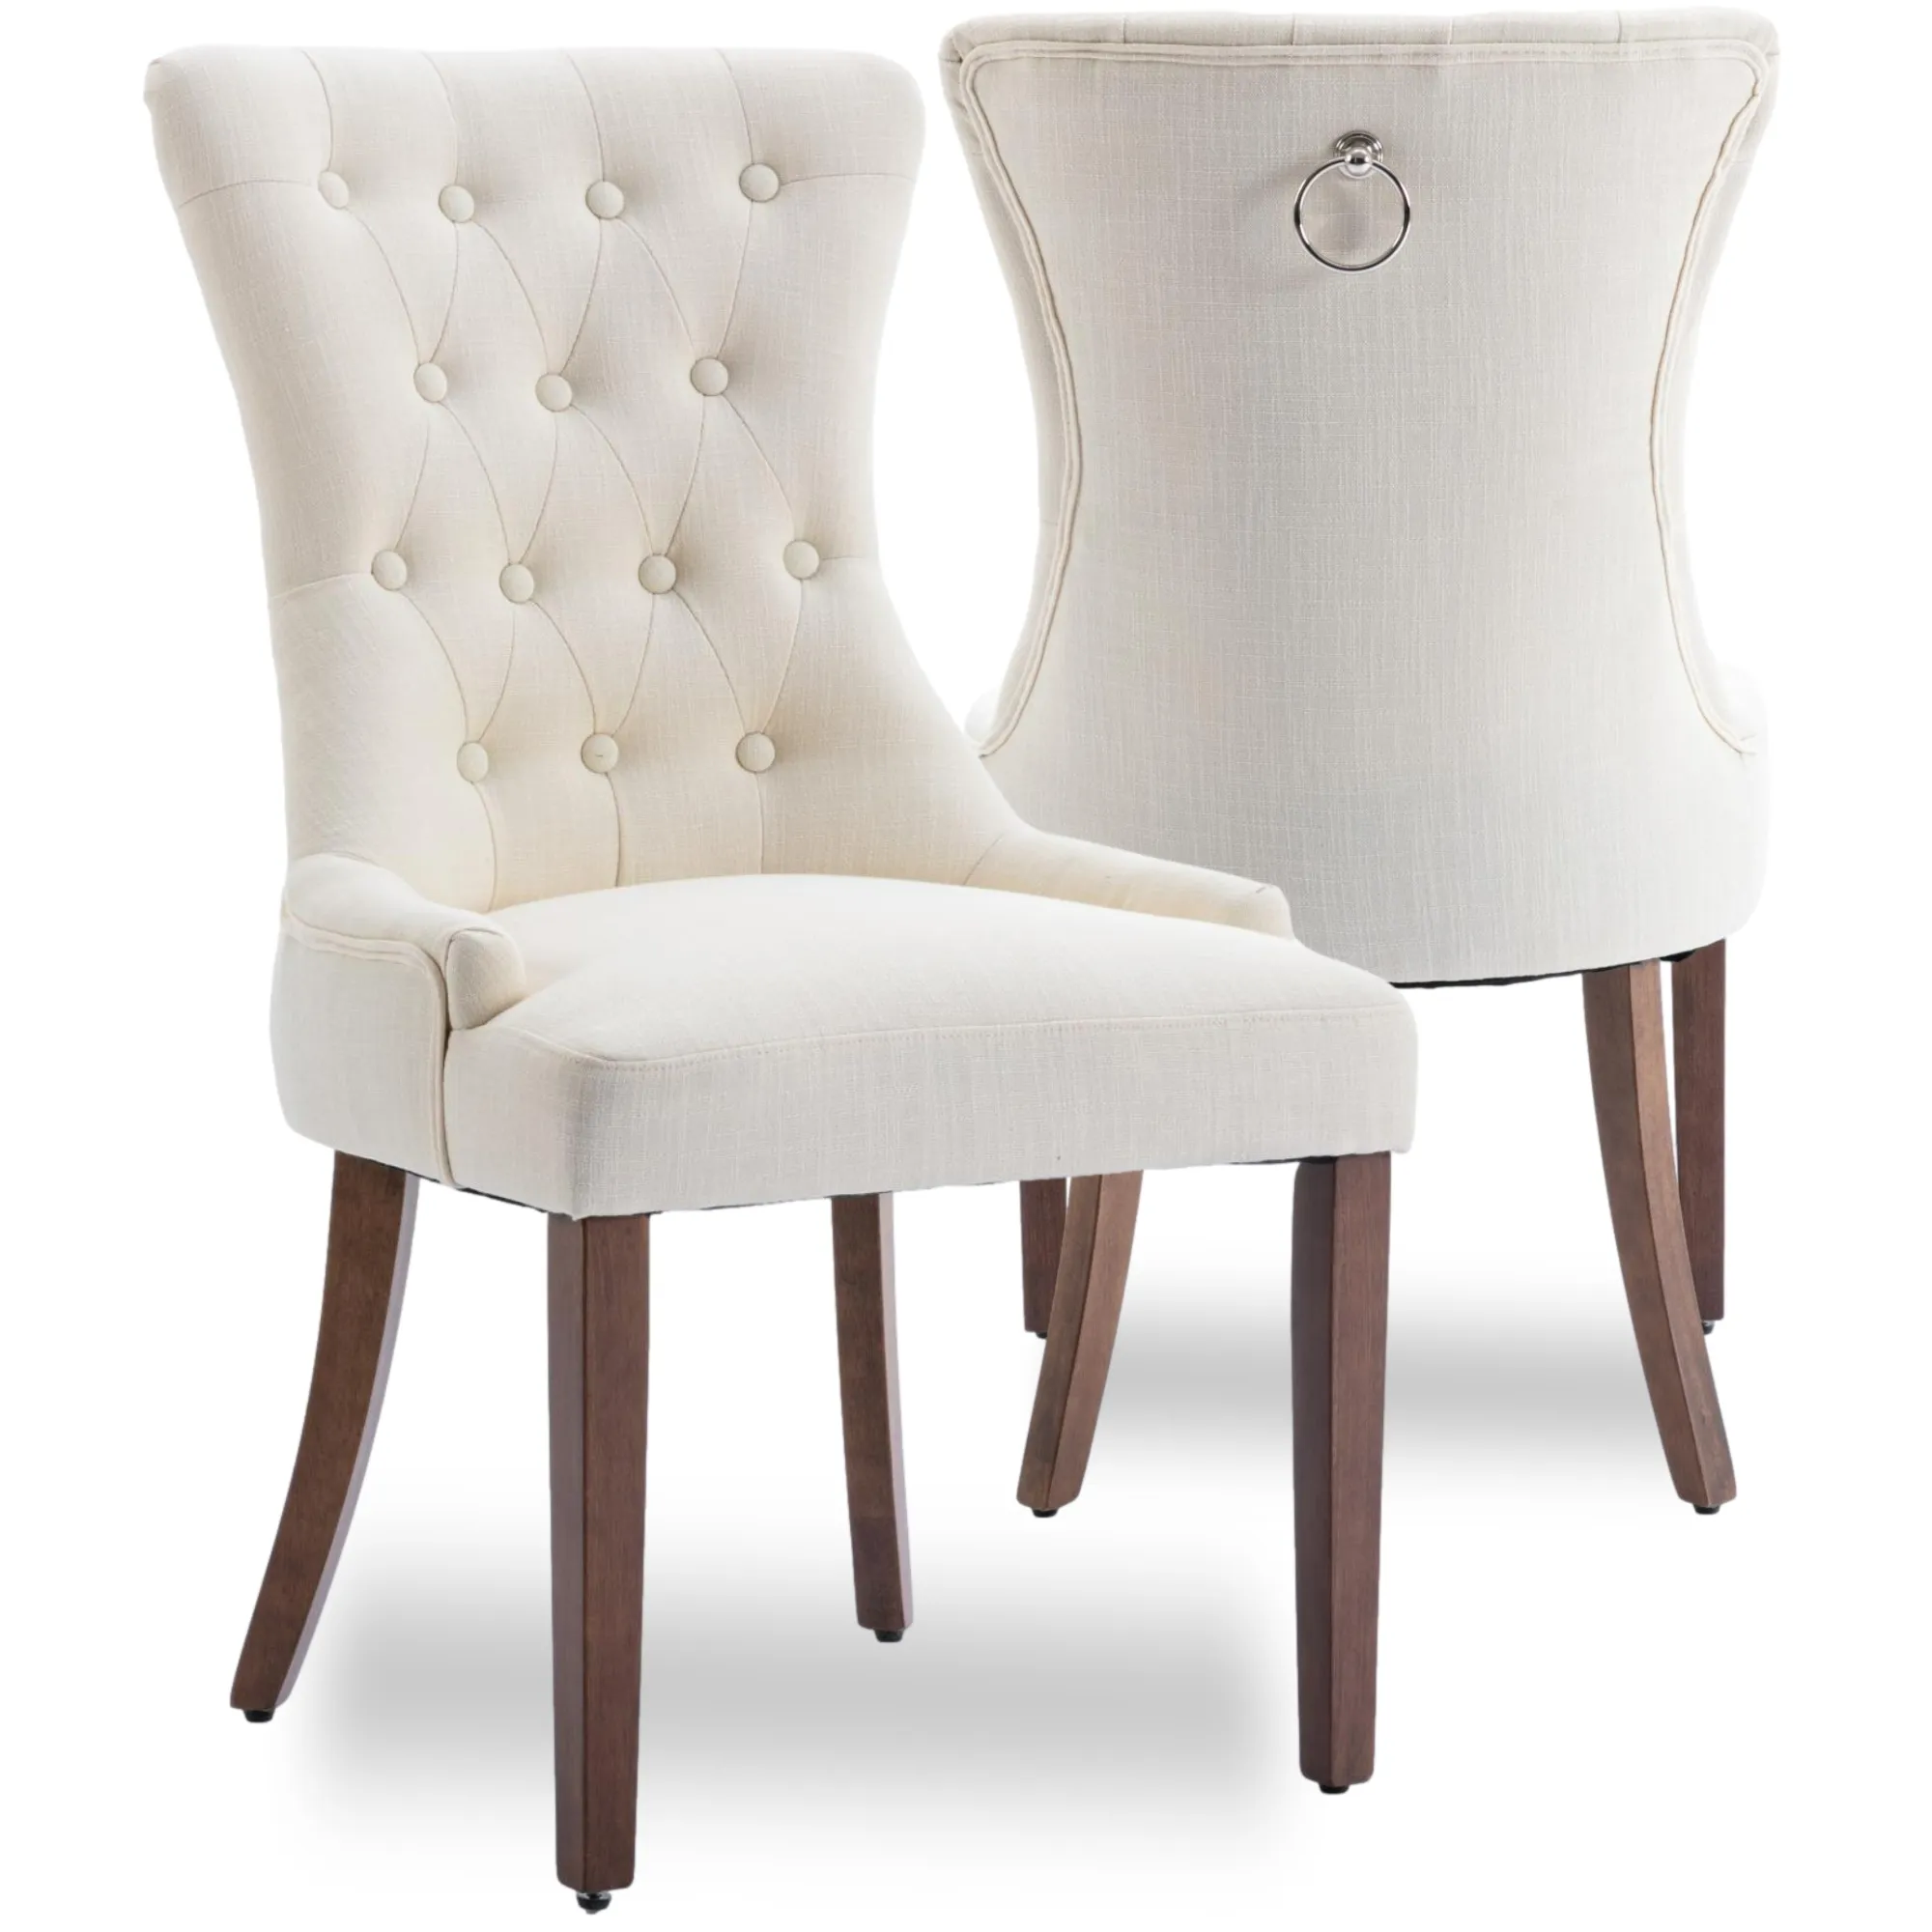 Exquisite Beige Linen Upholstered Tufted Back Solid Wood Legs Kitchen Dining Chair